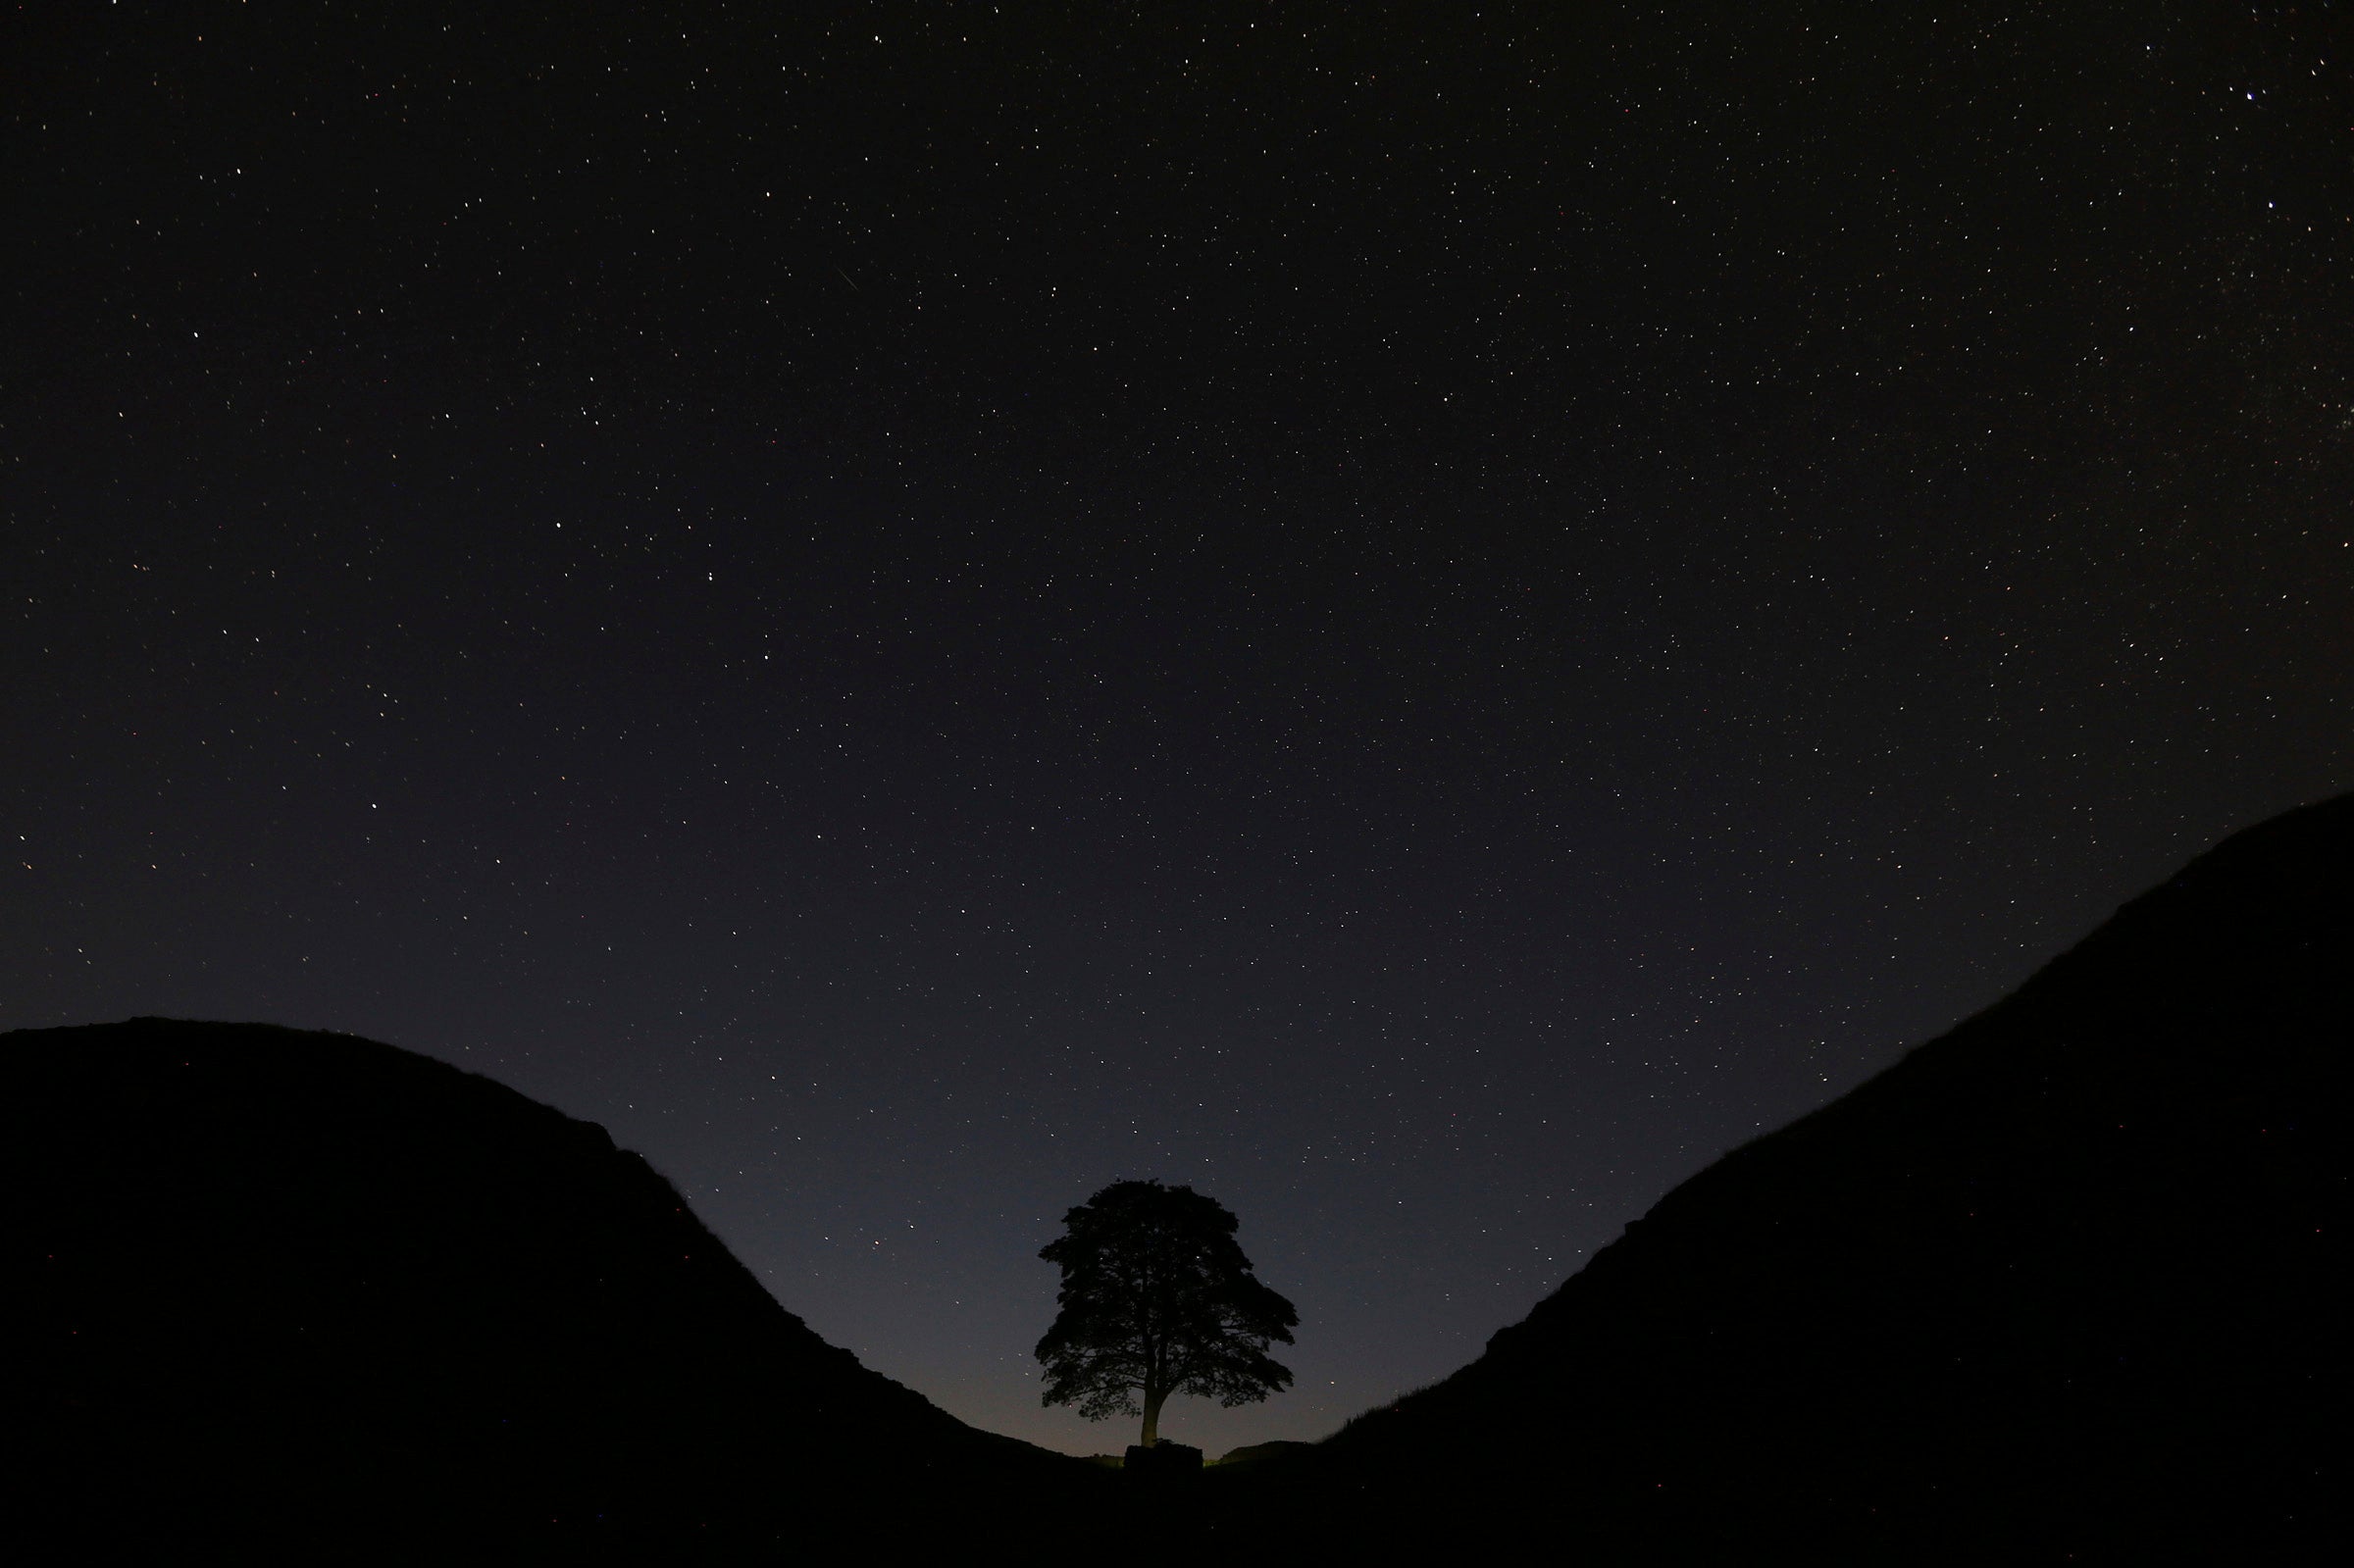 The stars above Sycamore Gap, prior to the Perseid Meteor Shower above Hadrian's Wall near Bardon Mill, England, in August 2015